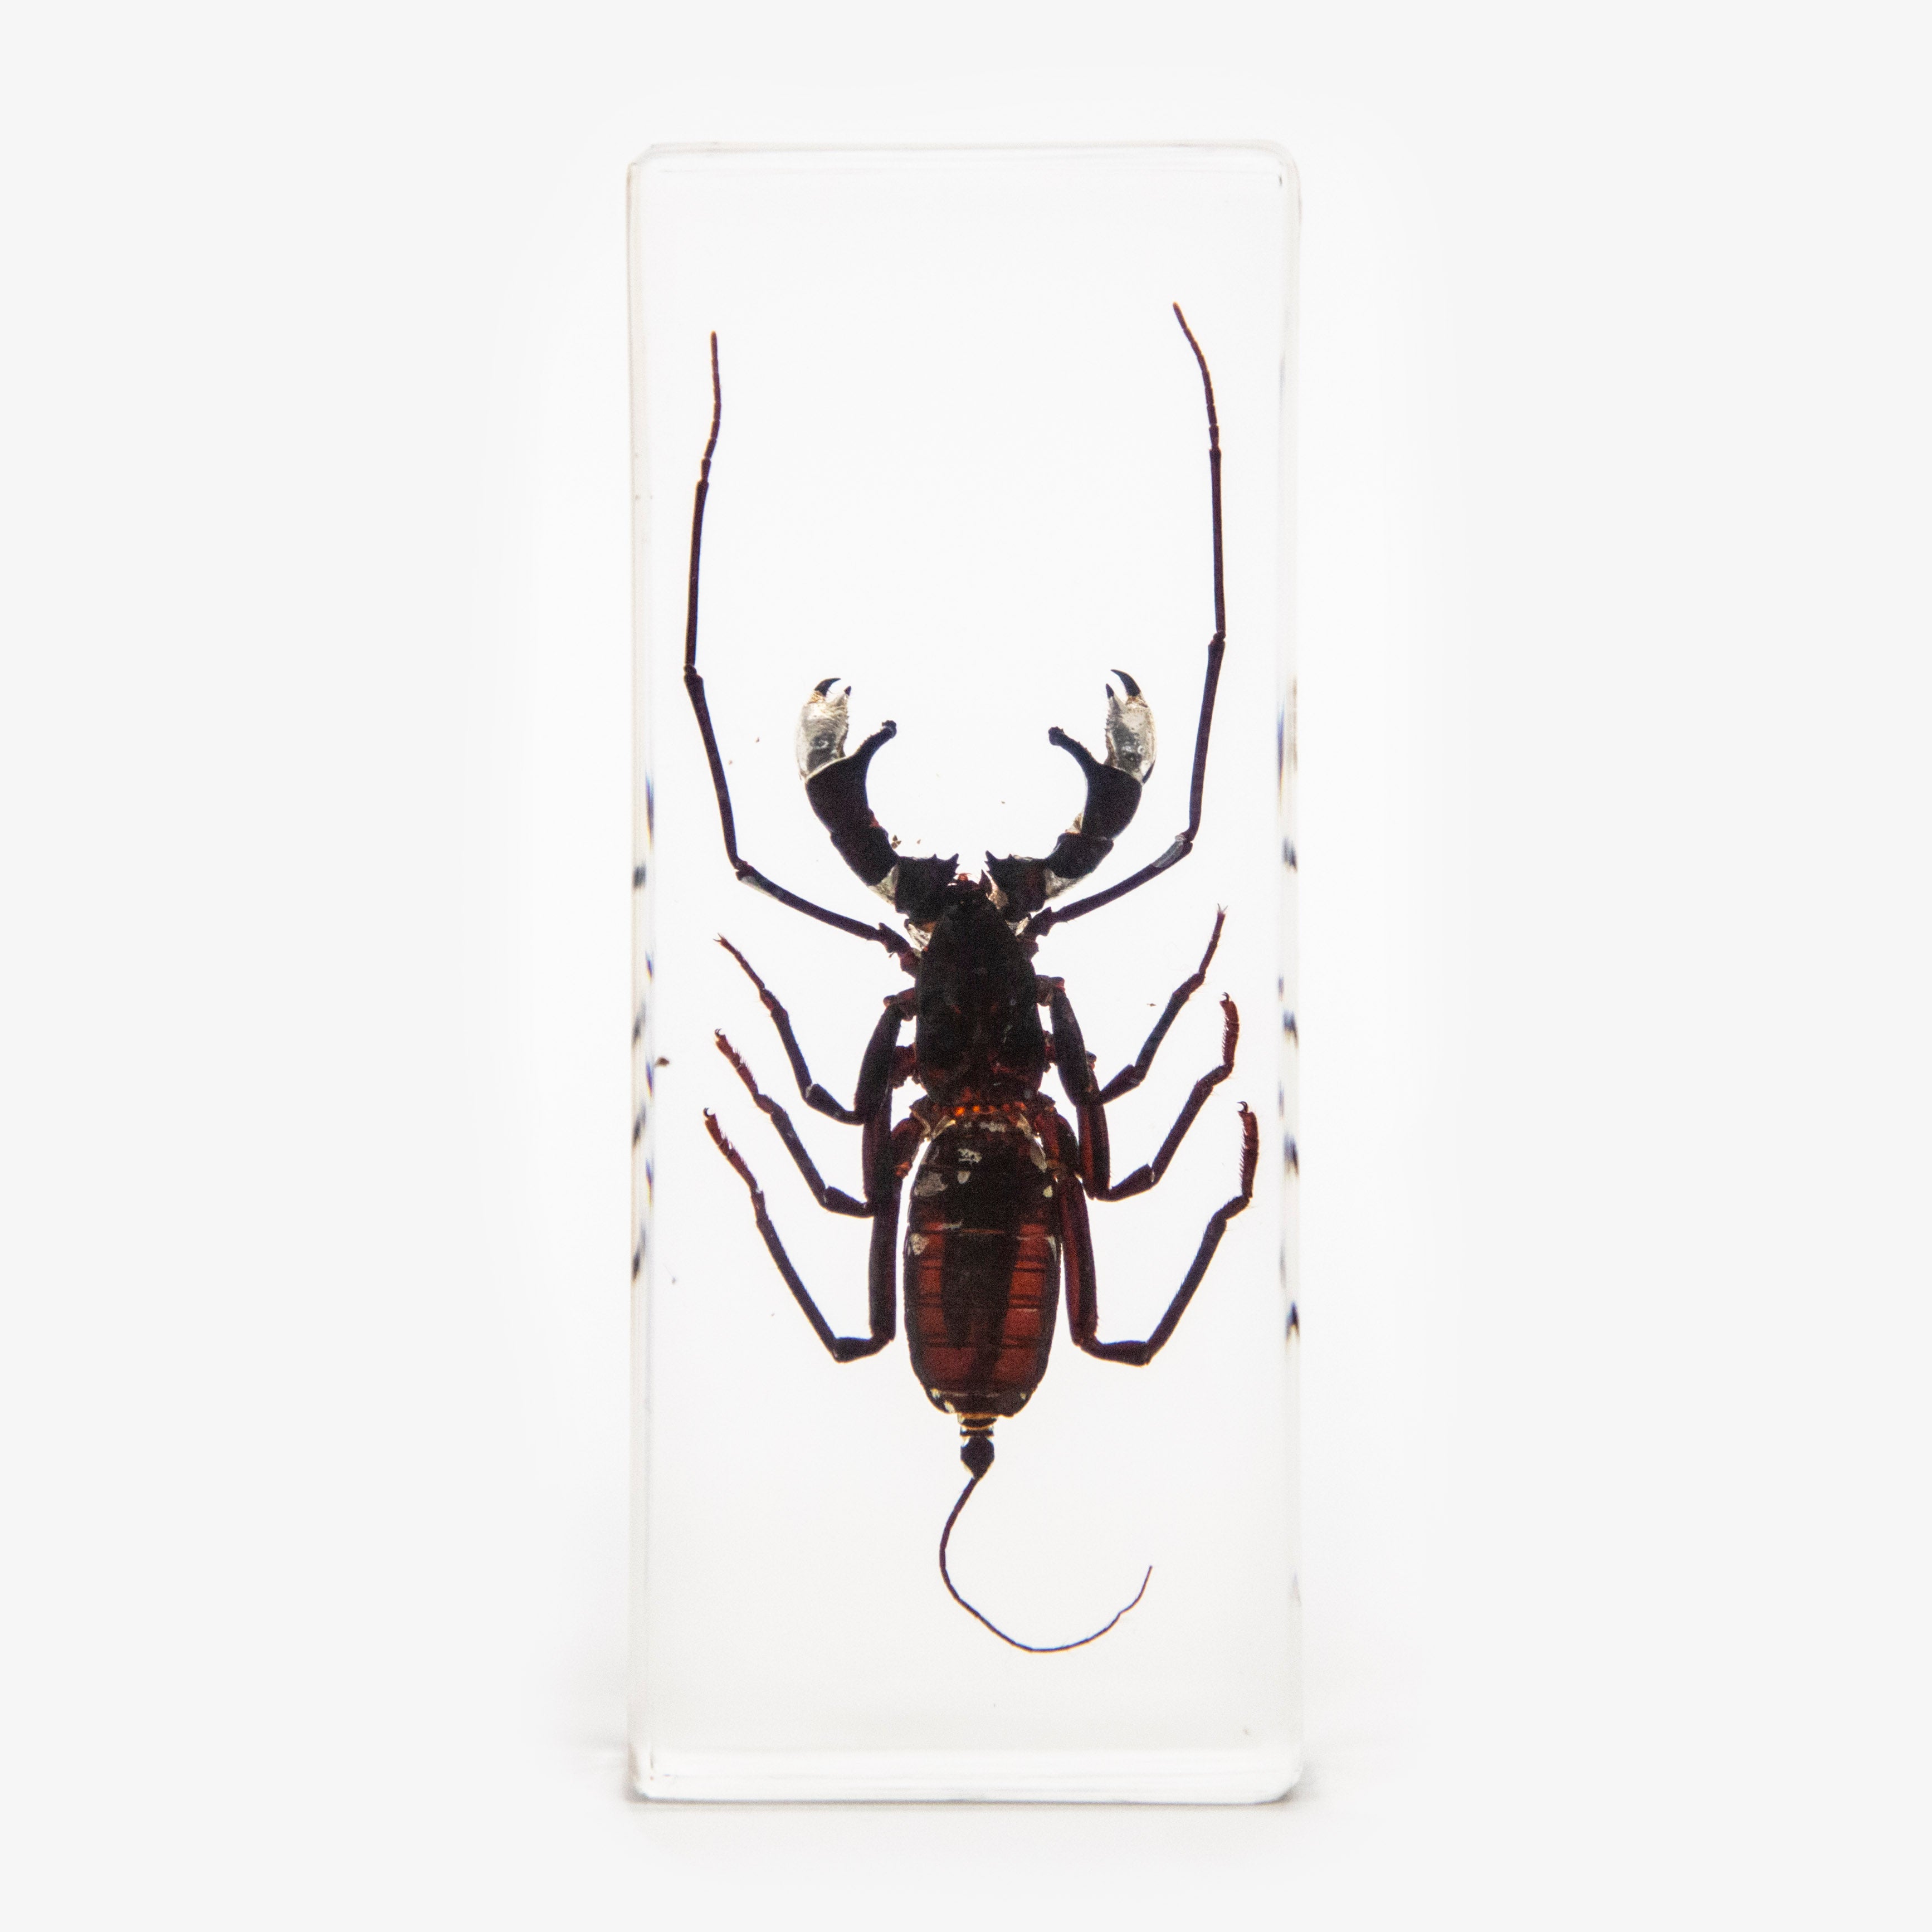 Whip Scorpion Resin Paperweight